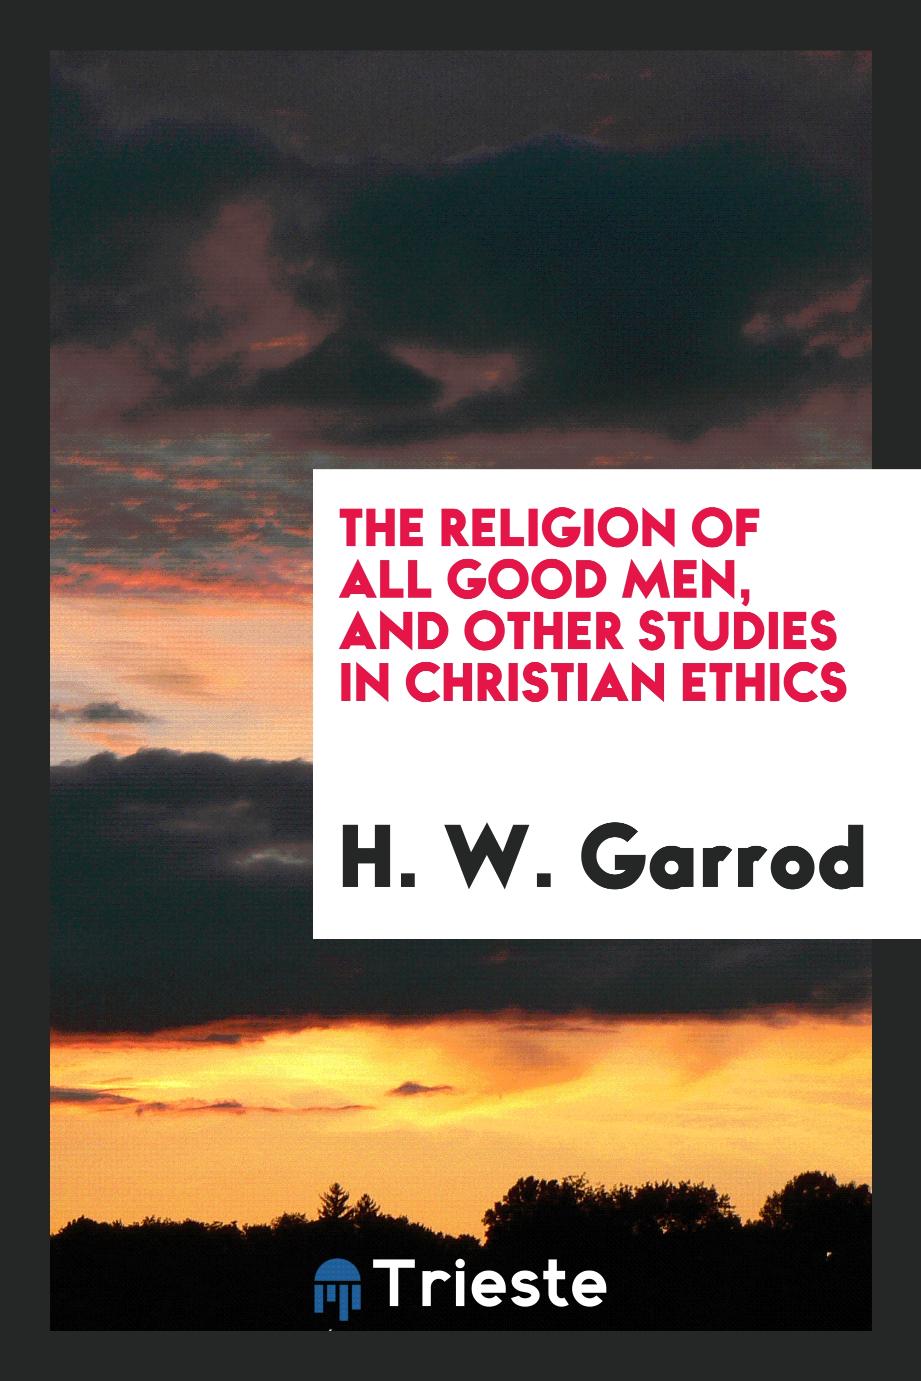 The religion of all good men, and other studies in Christian ethics